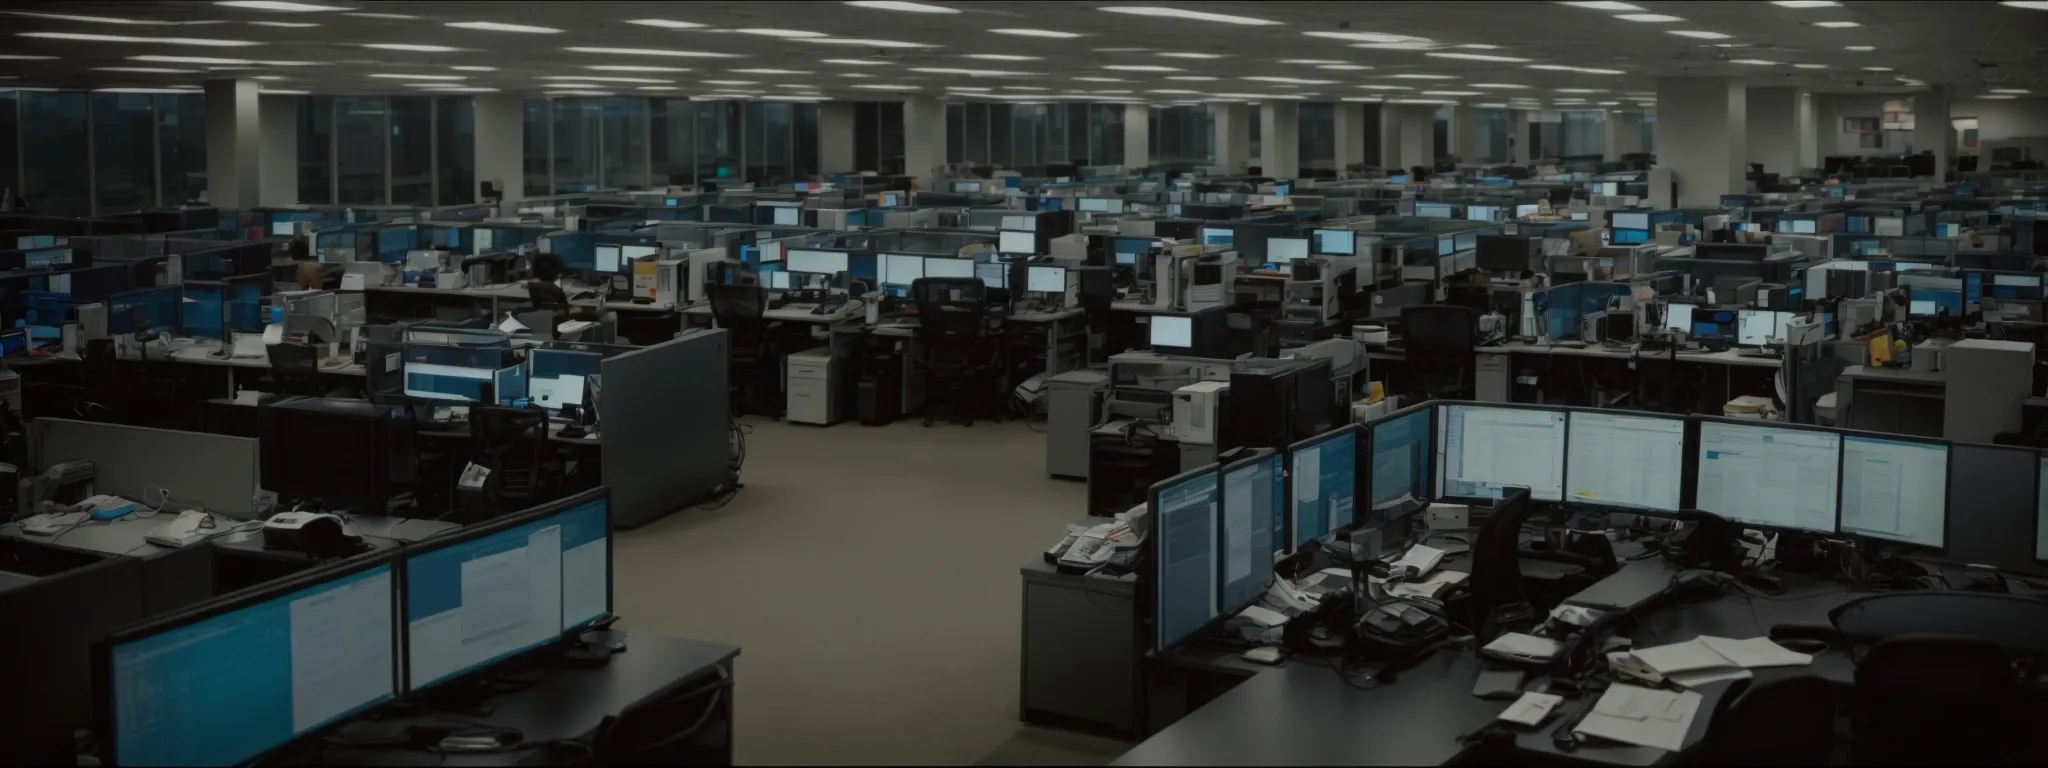 a bustling office with multiple workstations, where employees manage schedules on large computer screens.